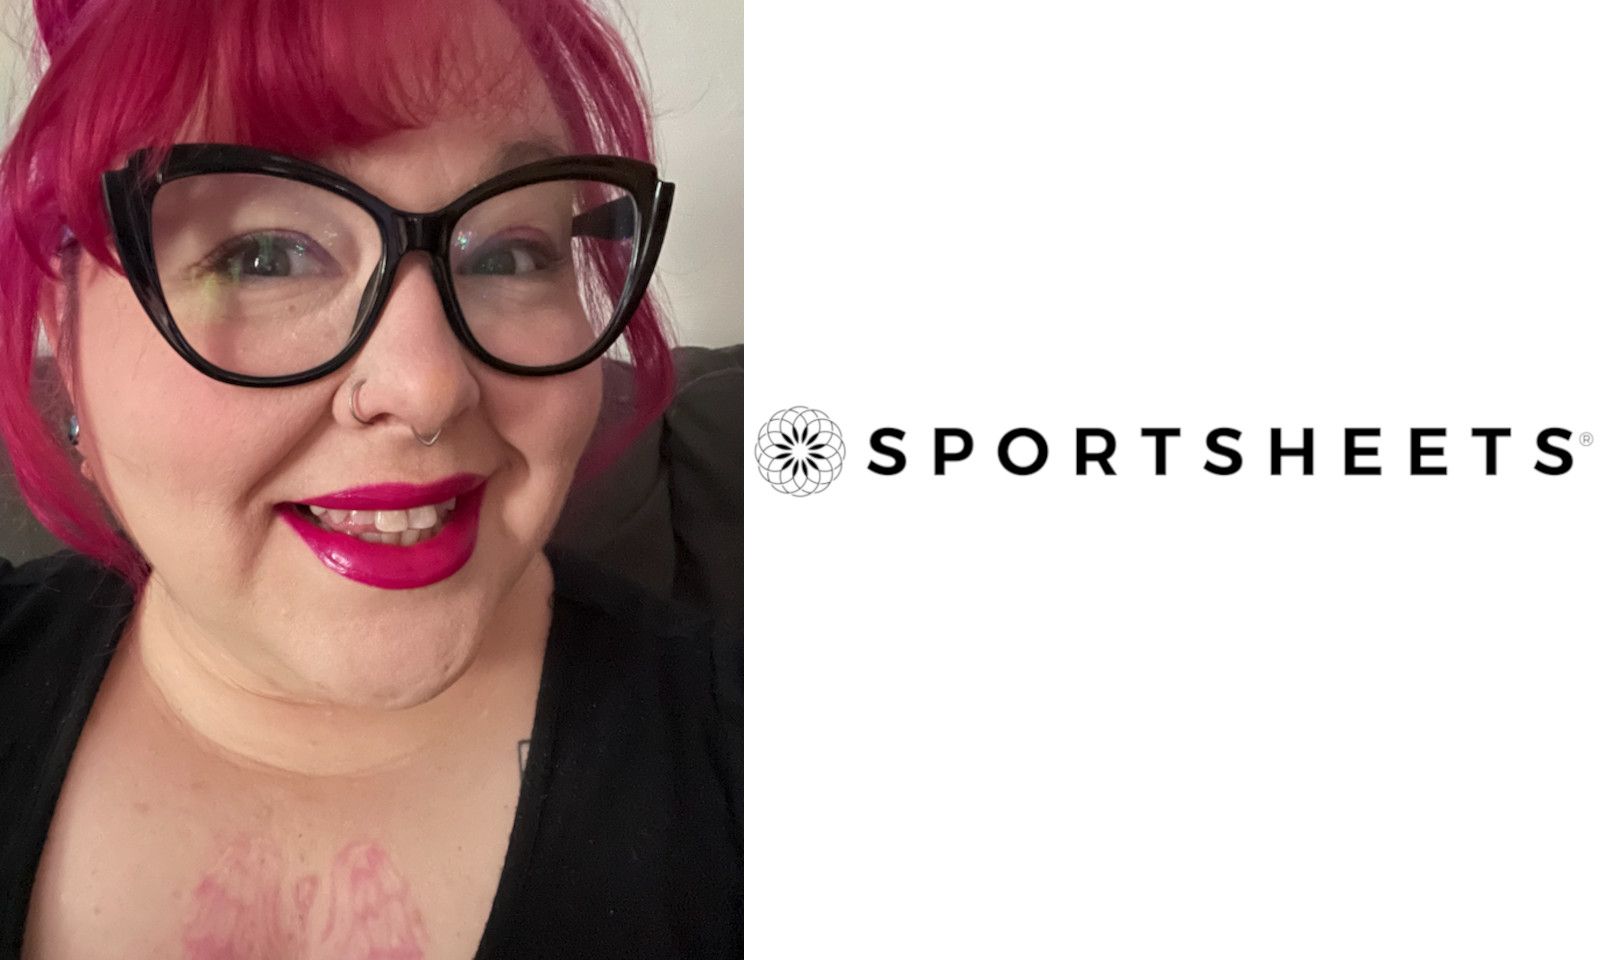 Sportsheets Welcomes Corrinne 'Rin' Musick to Its Sales Team